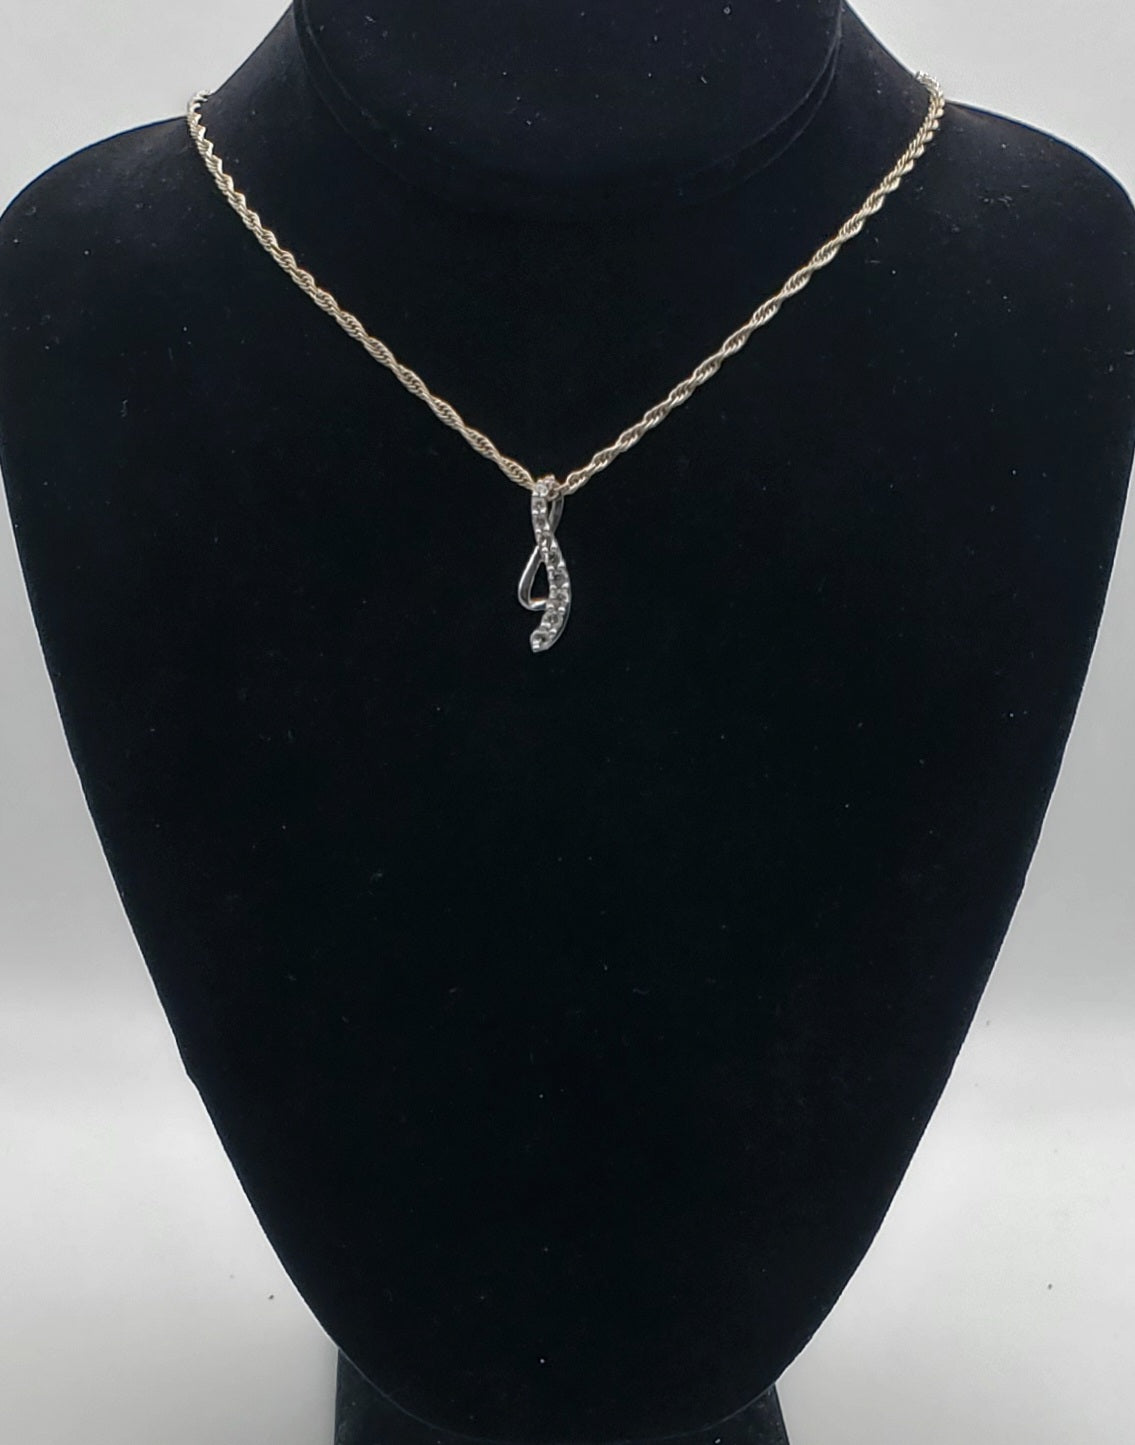 Vintage Colorless Sapphire Sterling Silver Pendant on Sterling Silver Chain Necklace - 24"